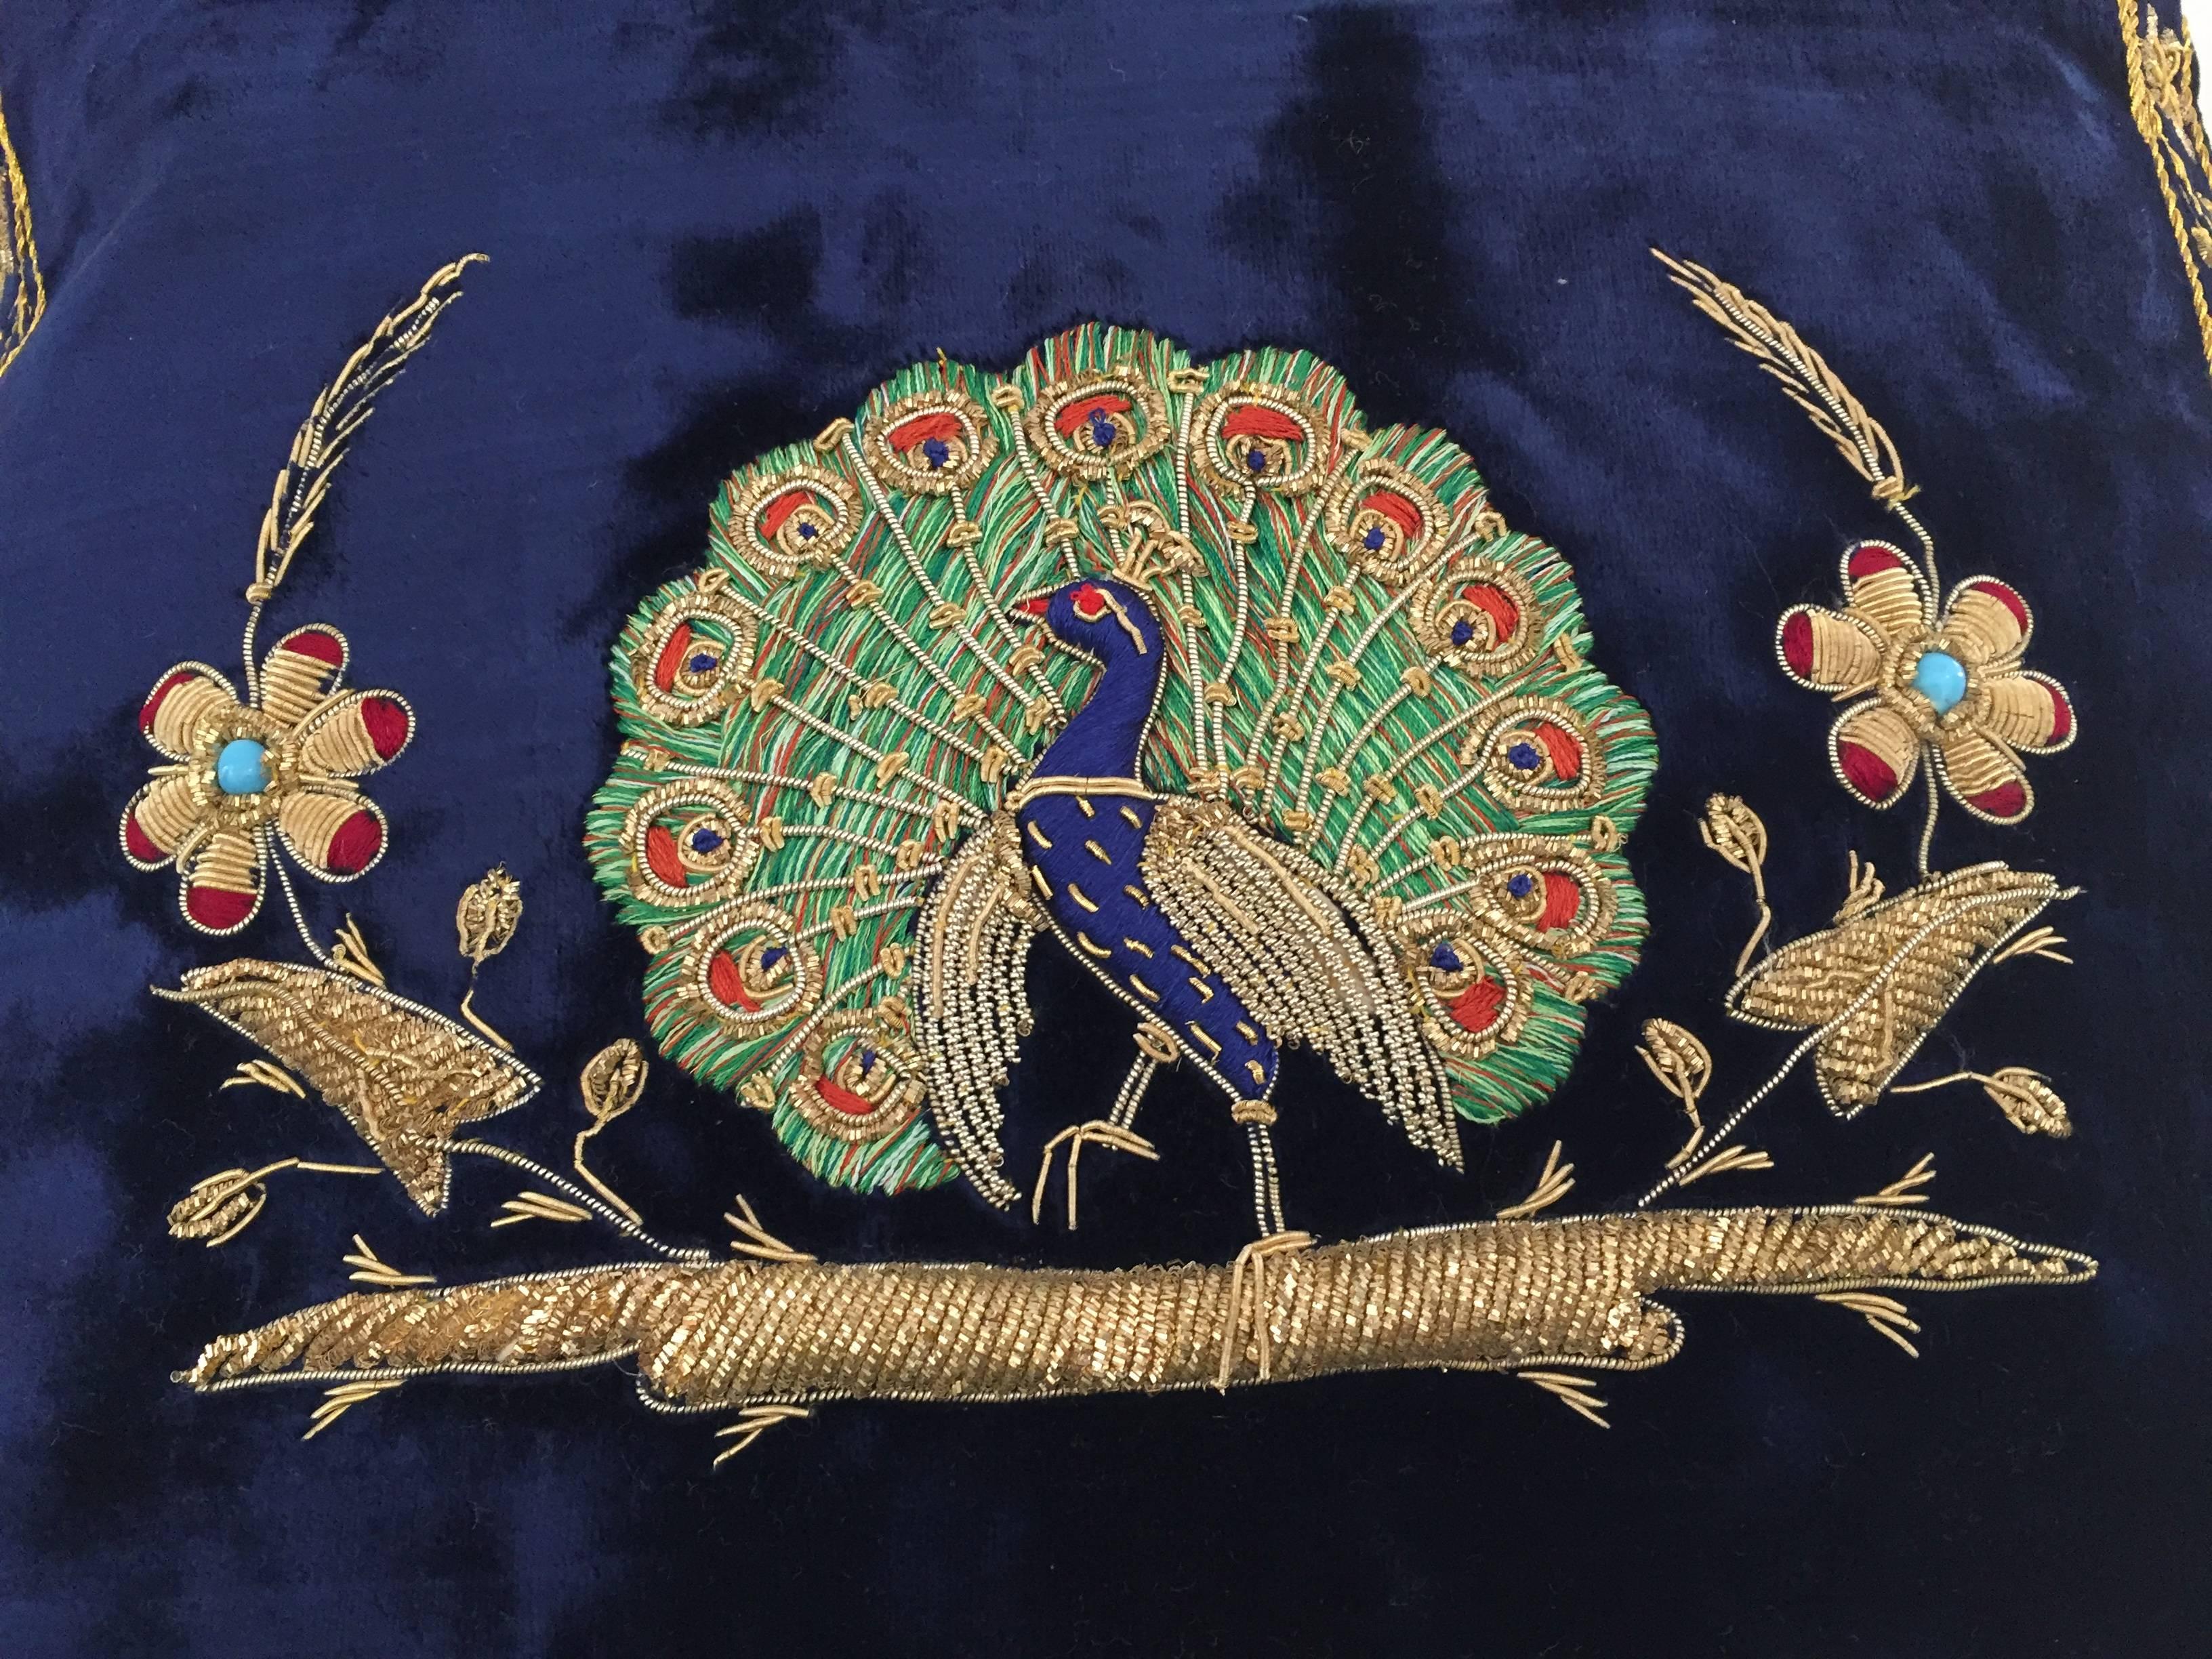 Velvet midnight blue silk pillow hand embroidered with gold threads and sequins depicting a royal peacock on a branch.
Gold, green, indigo blue and ruby red with turquoise pearl.
One of a kind handcrafted throw pillow.
Silk backed with zipper.